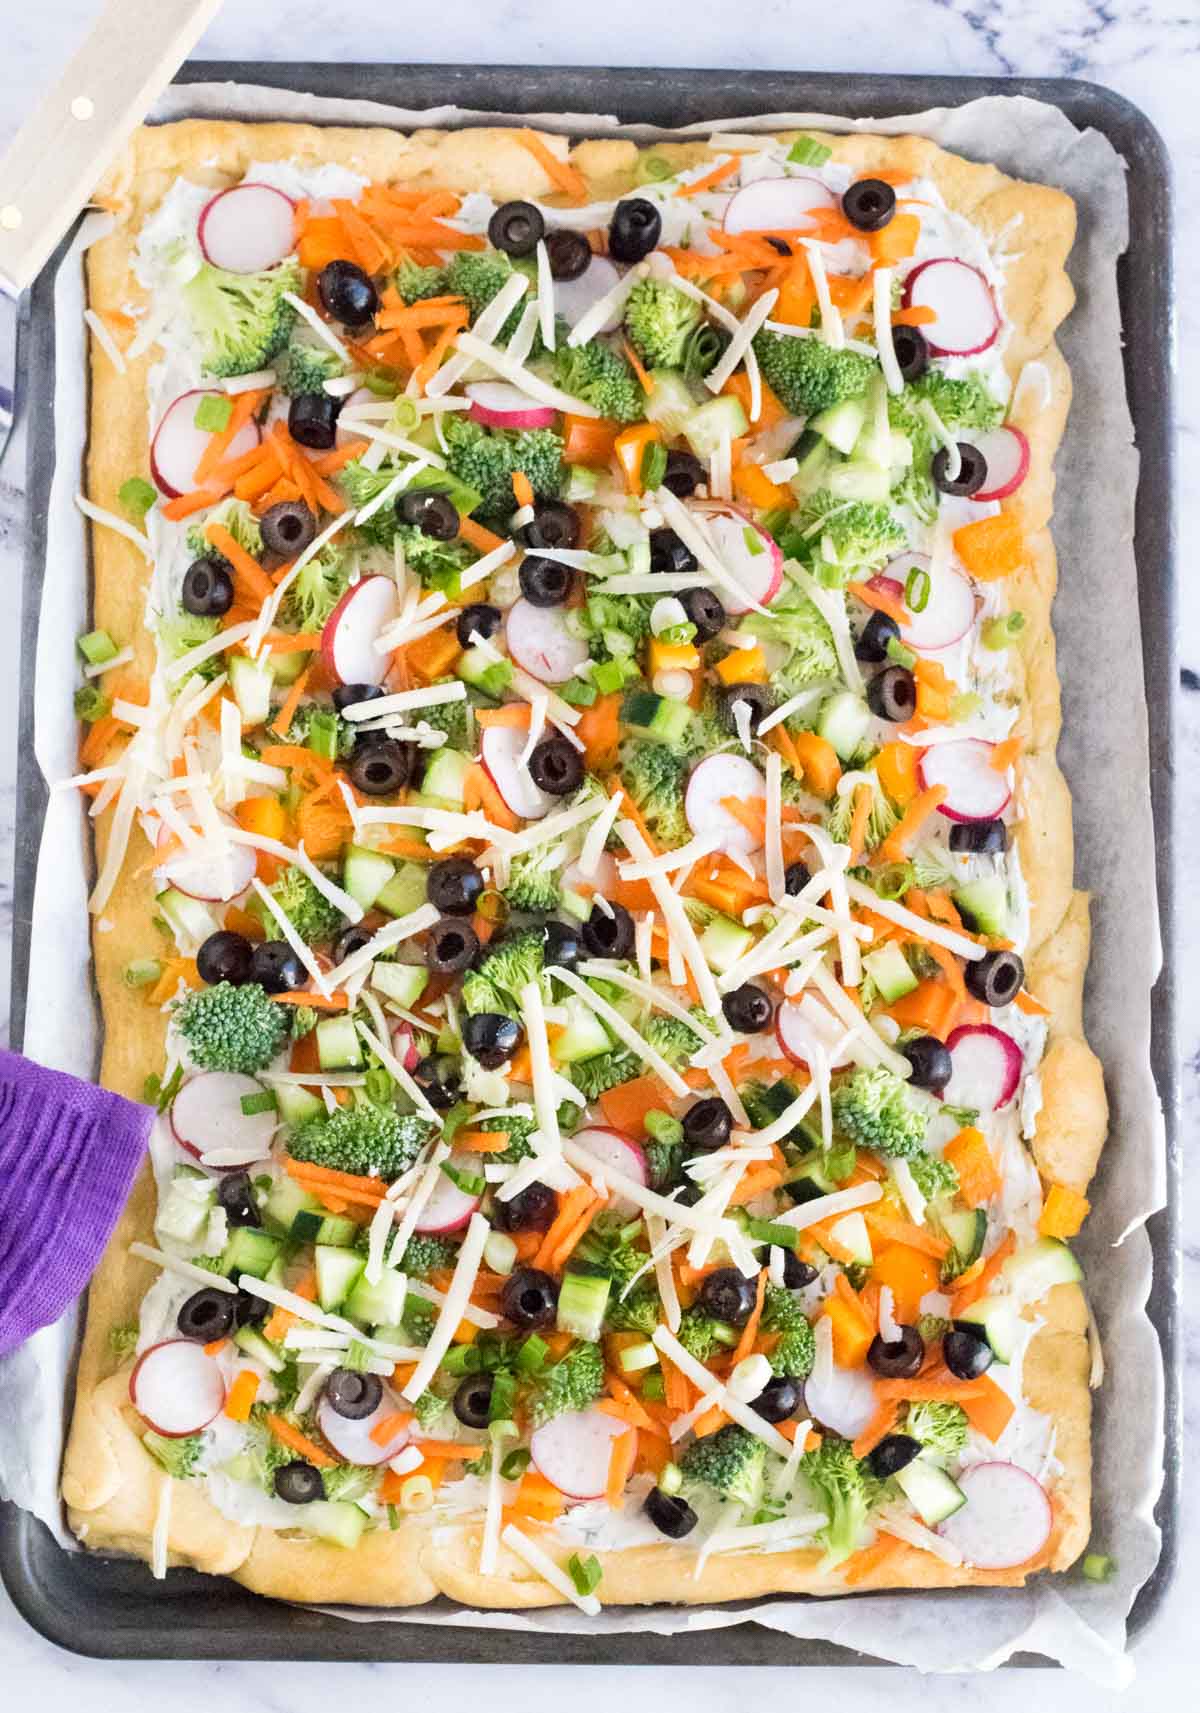 Crescent roll veggie pizza shown from above.